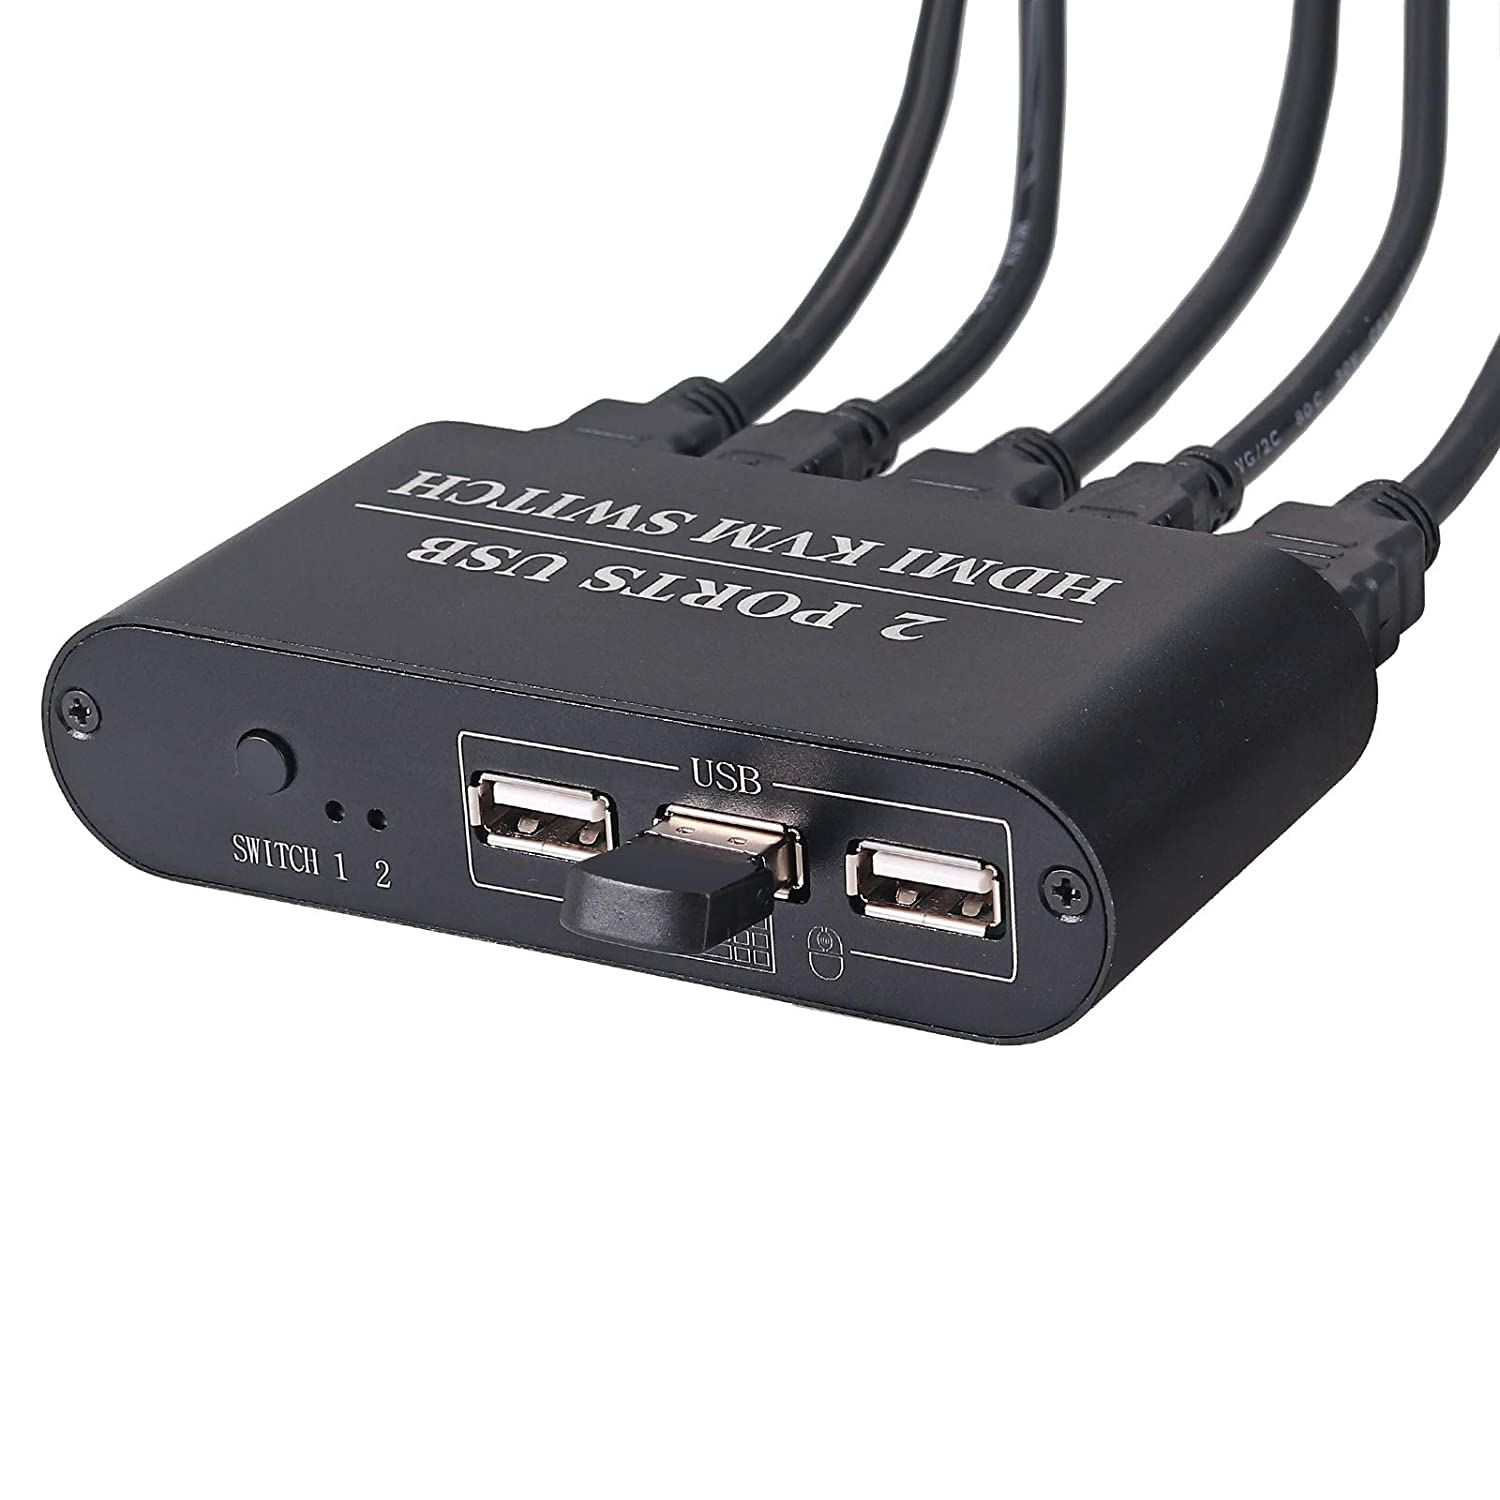 LiNKFOR HDMI Switch 2 in 1 Box LiNKFOR Store